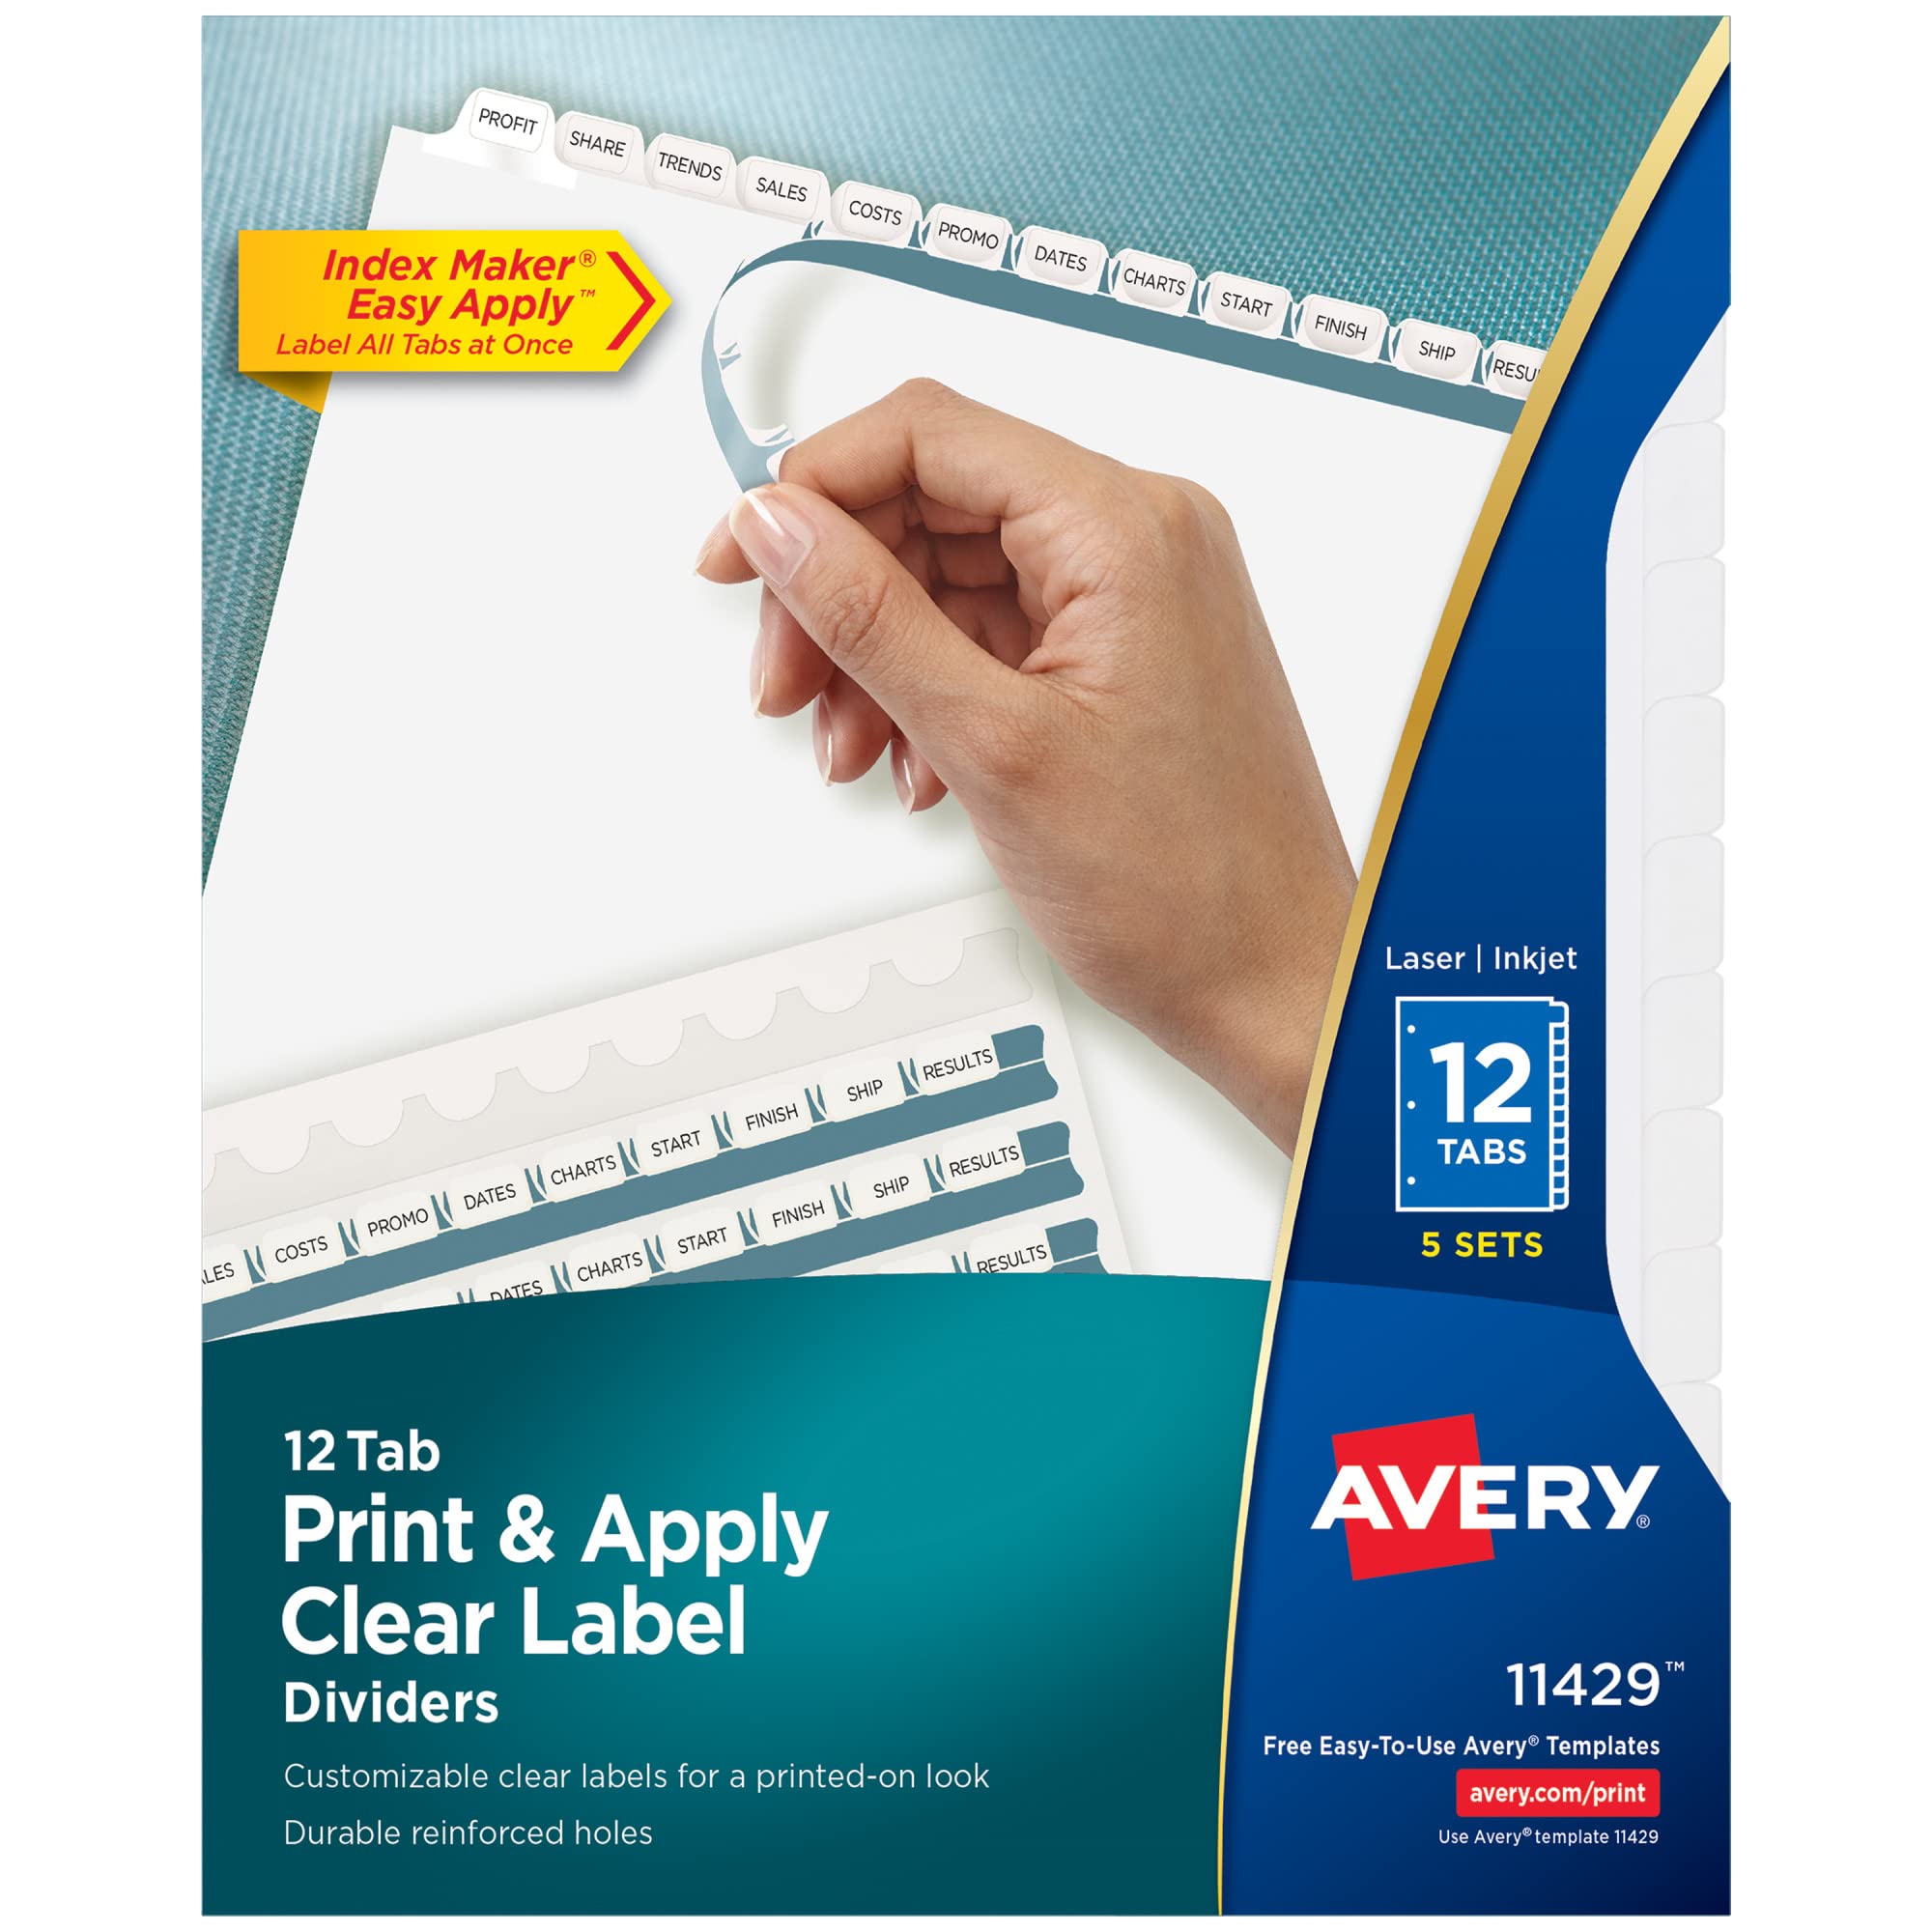 Avery 12 Tab Dividers for 3 Ring Binder, Easy Print & Apply Clear Label Strip, Index Maker Customizable White Tabs, 6-Pack of 5 Sets, 30 Sets Total (11429)